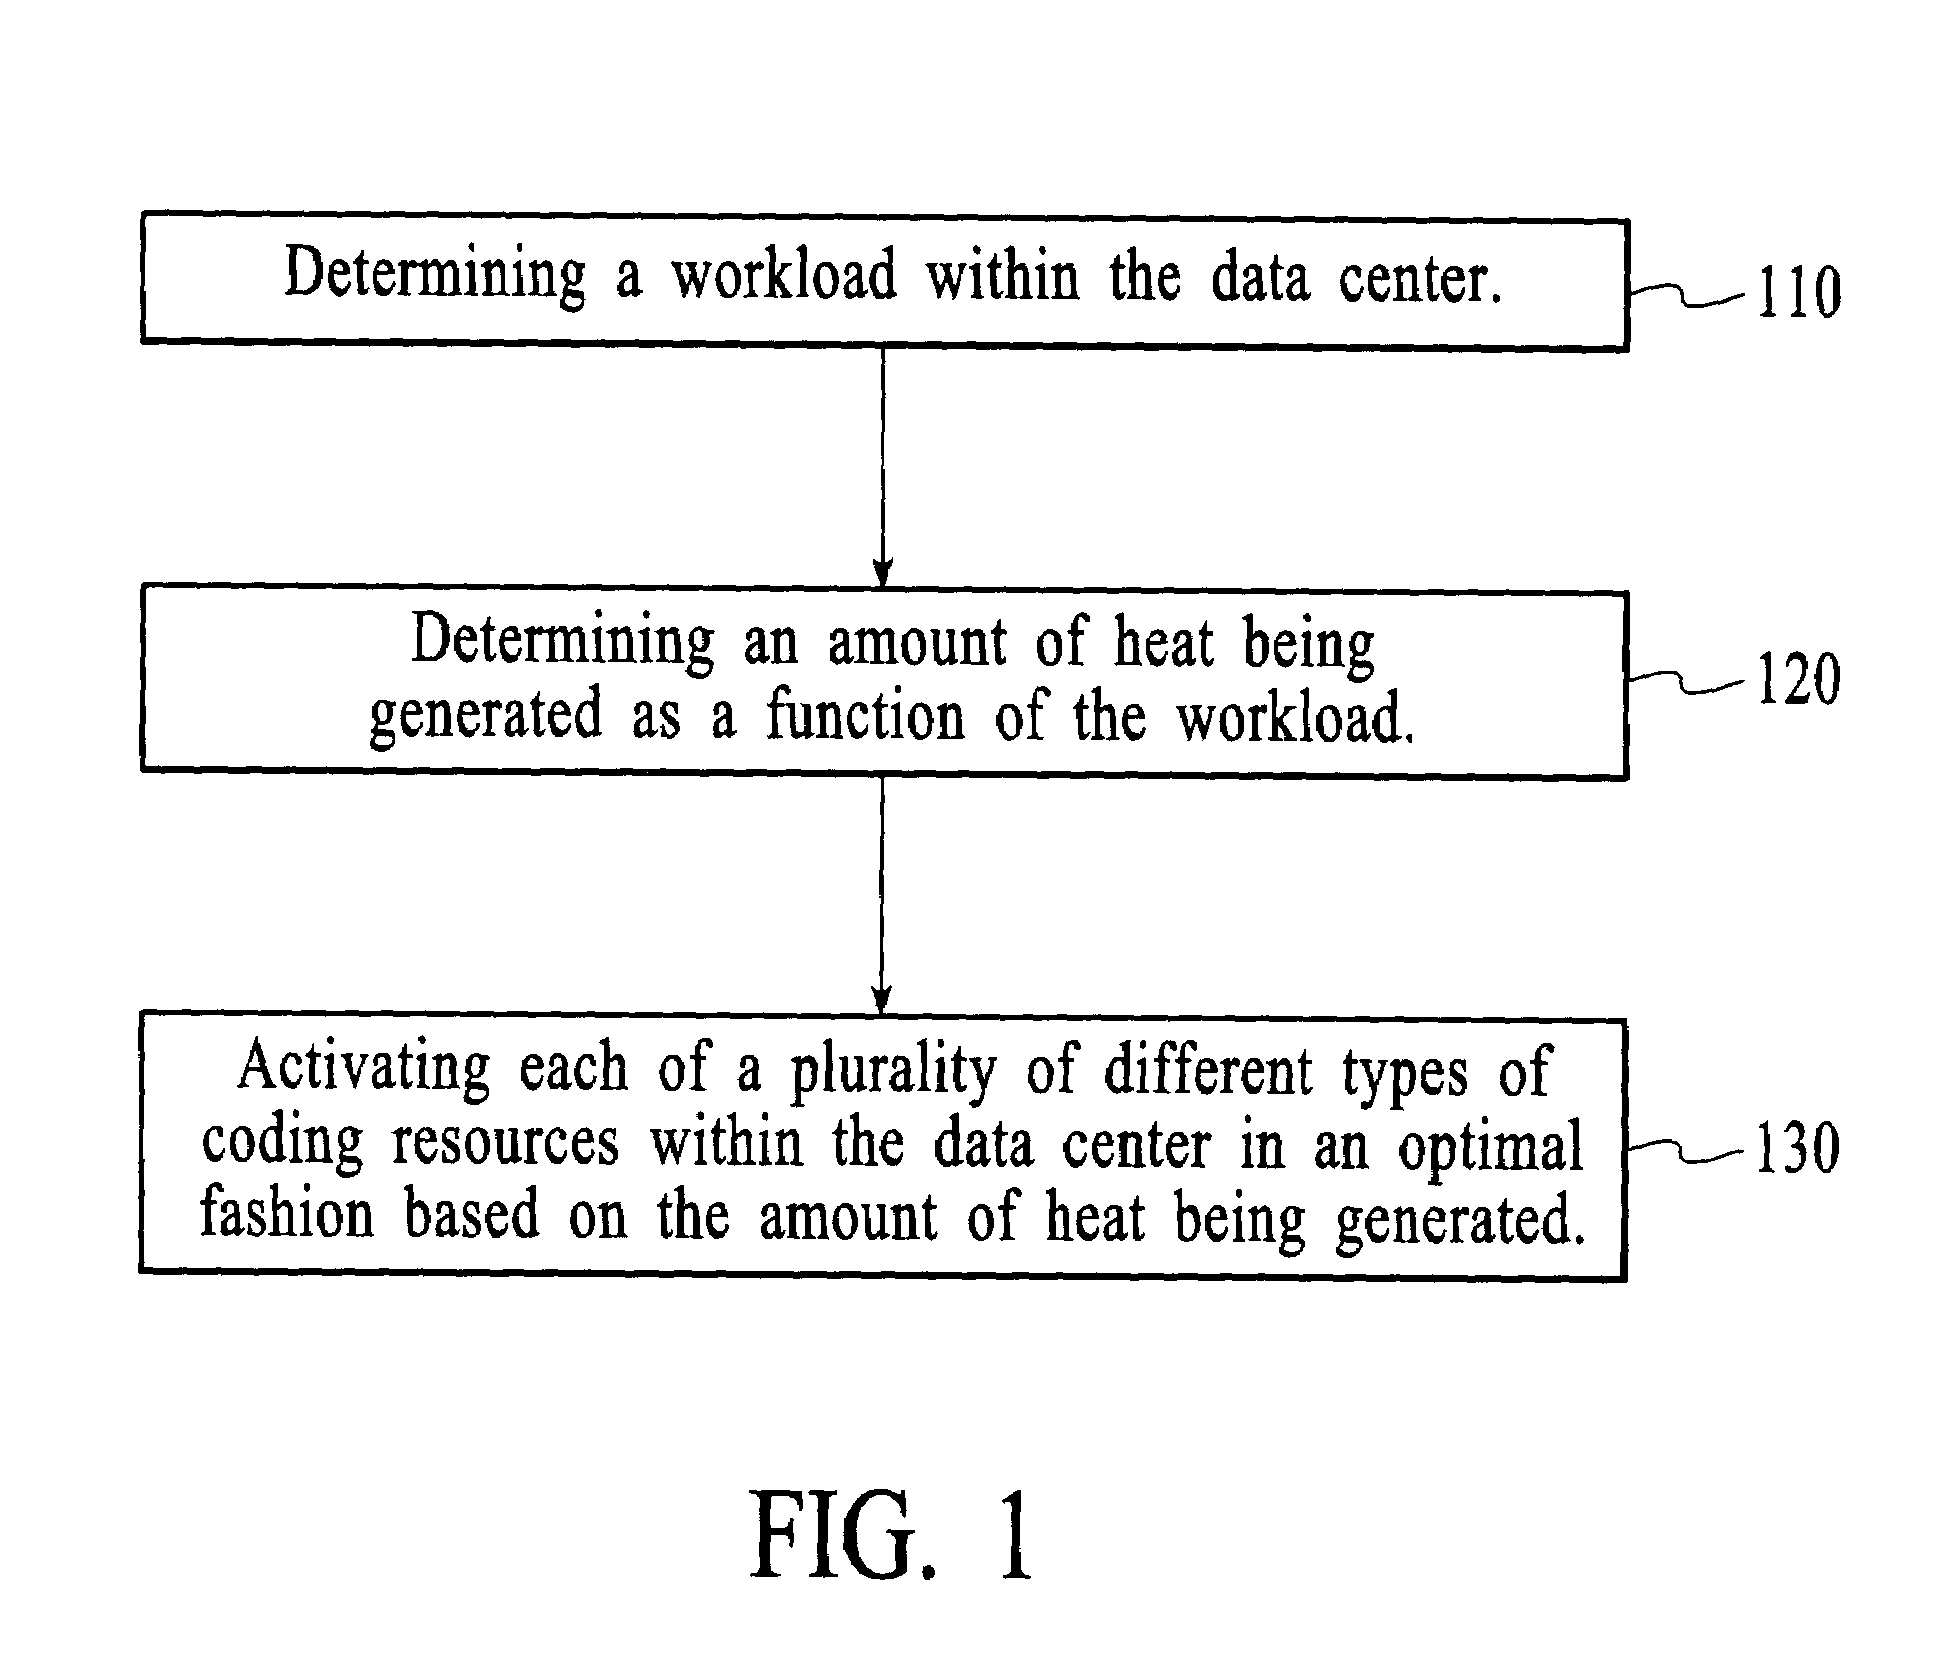 Method and system for dynamically controlling cooling resources in a data center